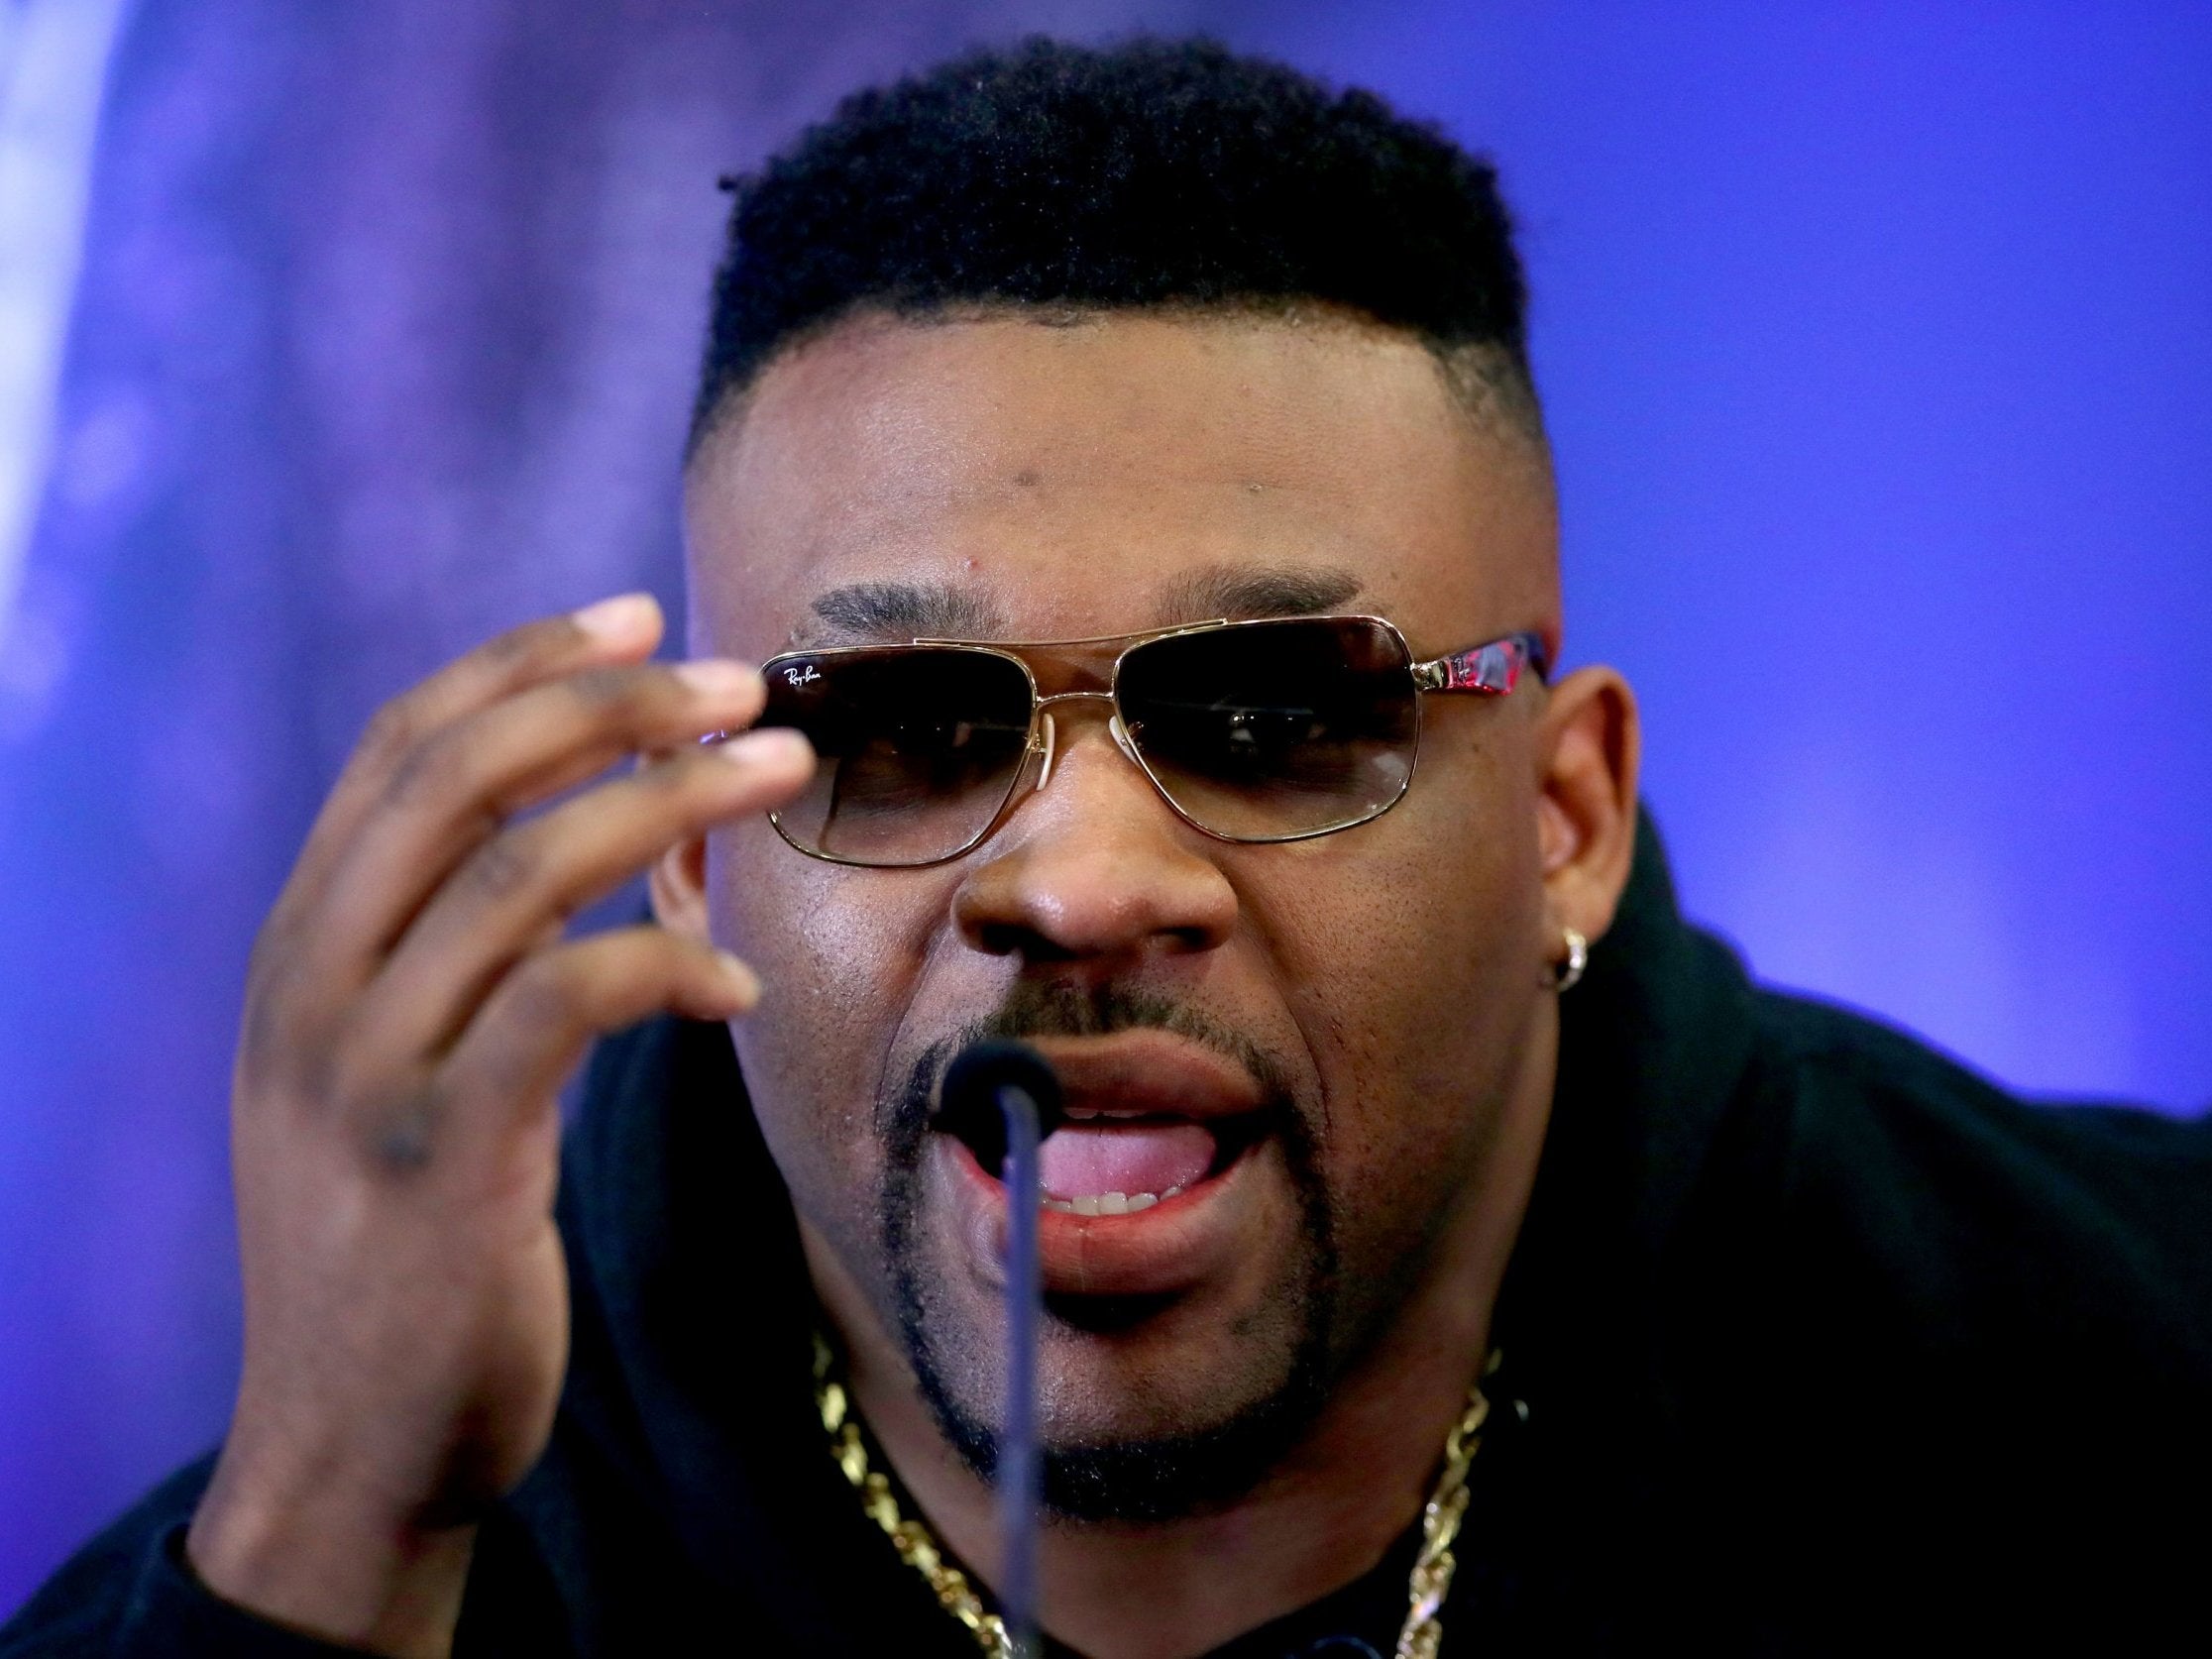 Jarrell Miller was pulled from a fight with Joshua in 2019 after failing a doping test